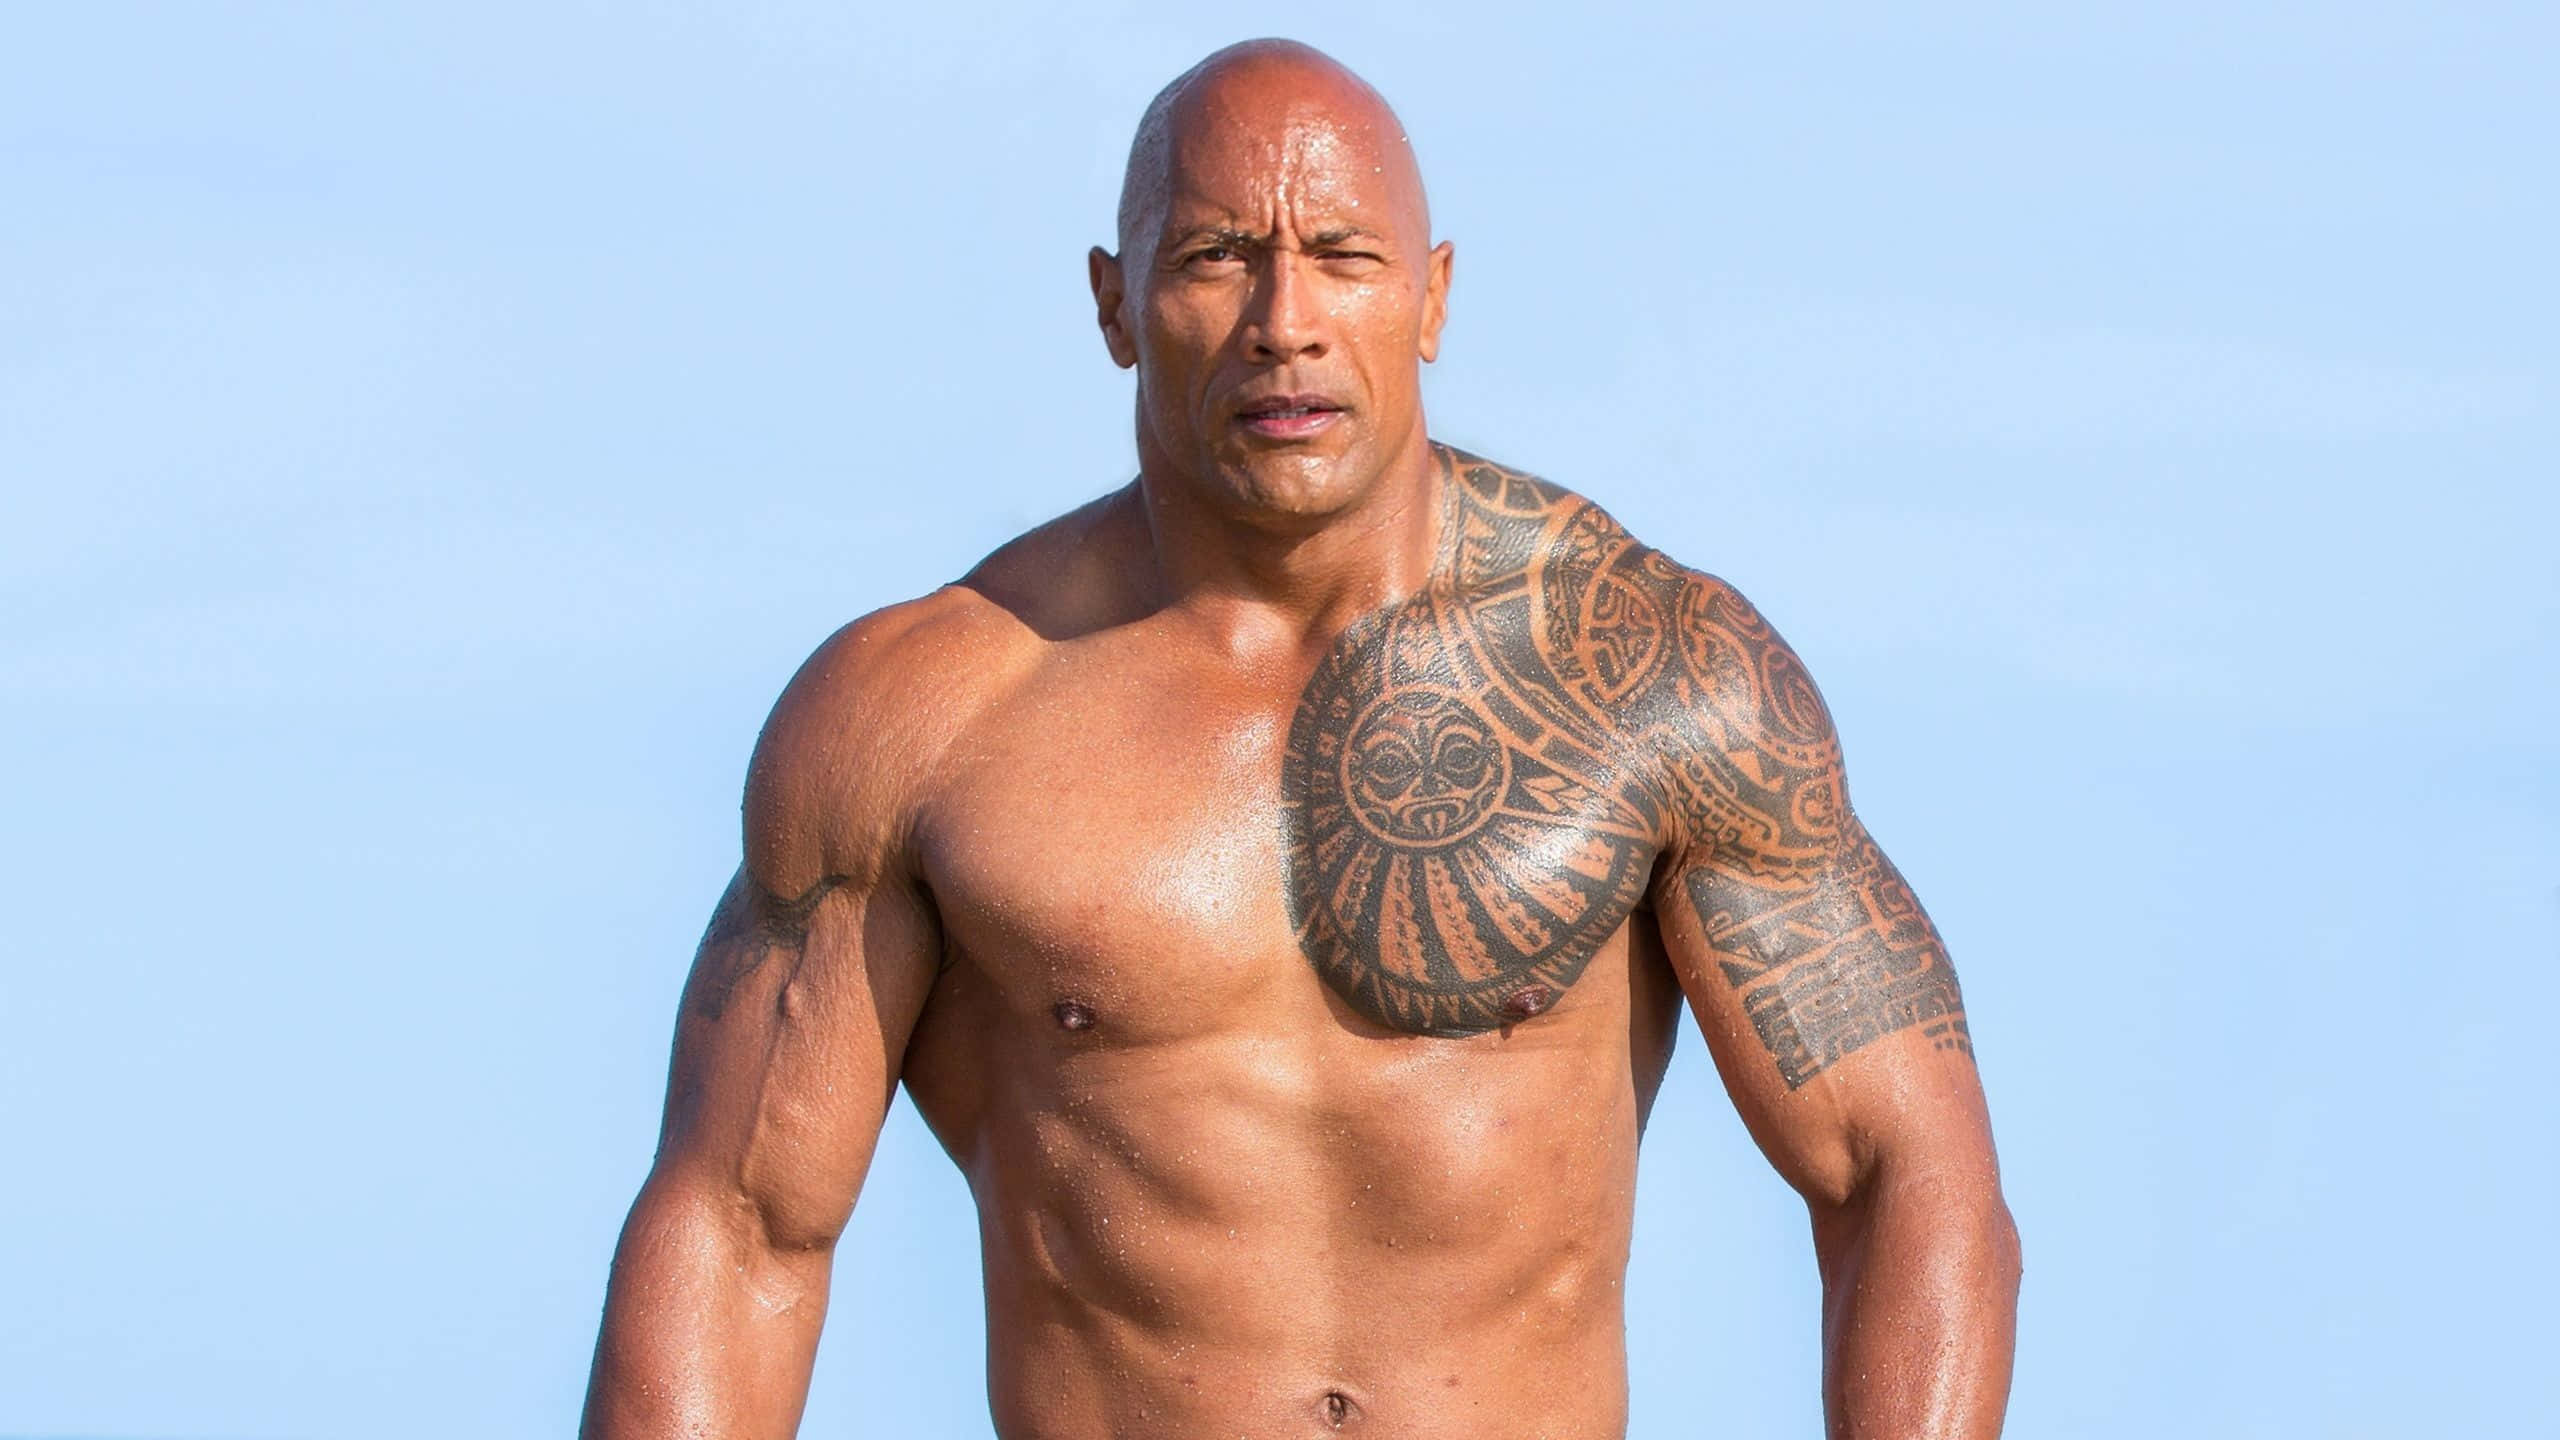 Dwayne "The Rock" Johnson in Action